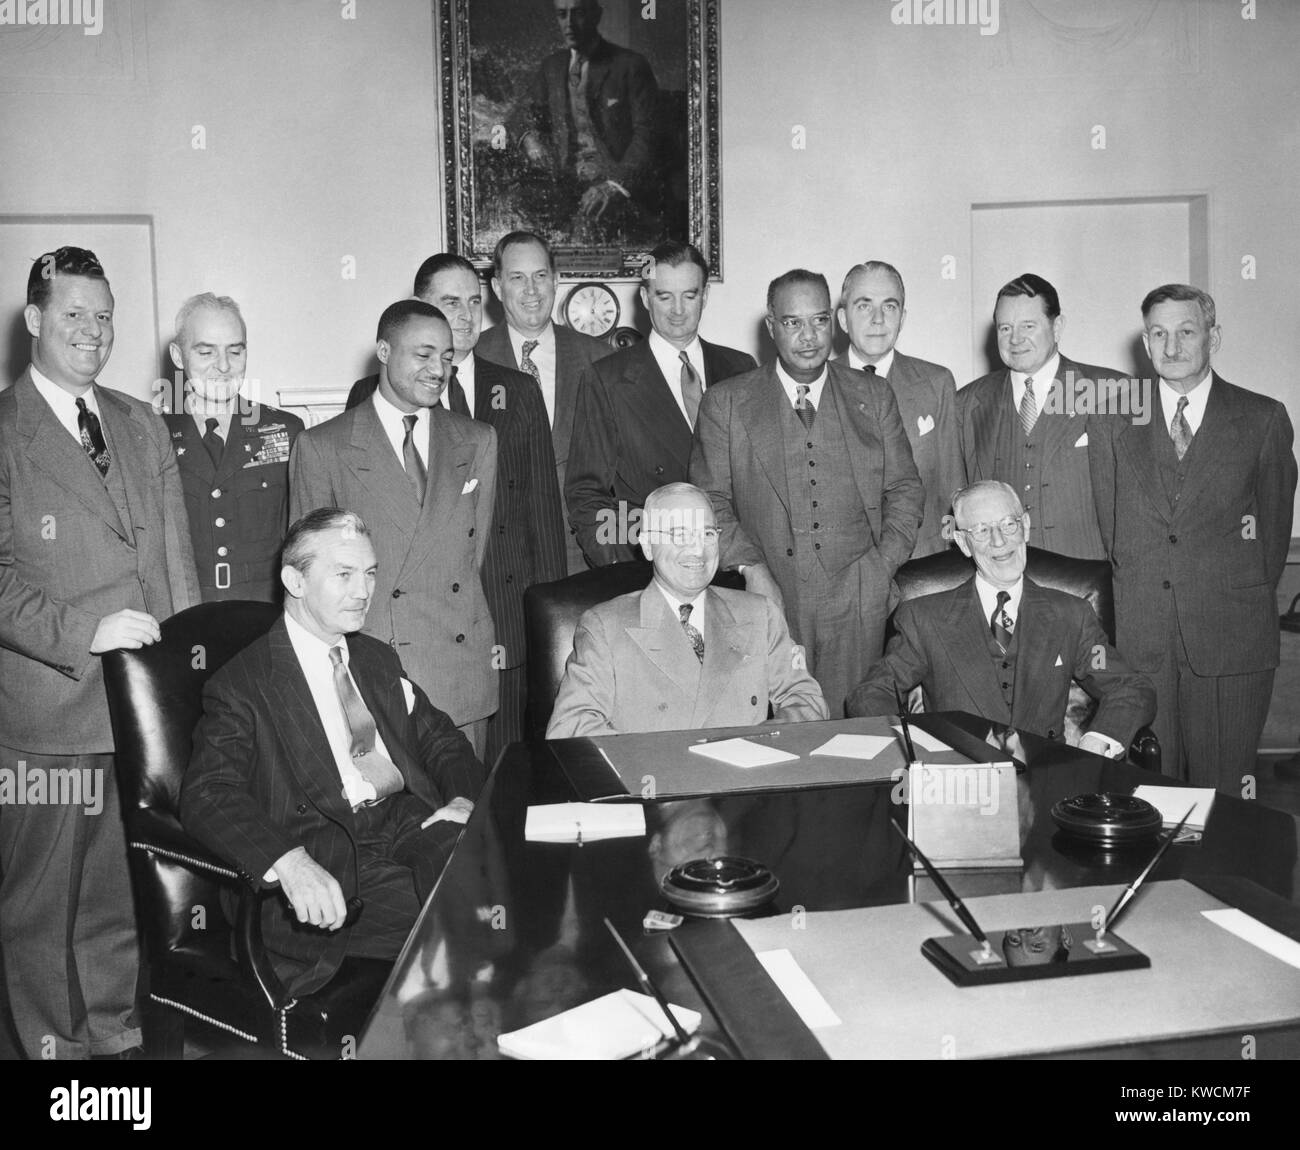 Pres. Truman desegregated the U.S. Military with Executive Order 9981, on July 26, 1948. Six months later he conferred with the Committee on Equality of Treatment and Opportunity, Jan. 12, 1949. Seated L-R: James Forrestal, Harry Truman, A.J. Donahue. Standing L-R: Thomas R. Reid; Gen. C.T. Lanhan; John H. Senzsacke; William E. Stevenson; Kenneth Royall; Stuart Symington; John L. Sullivan; Charles Fahy. - (BSLOC 2014 14 30) Stock Photo